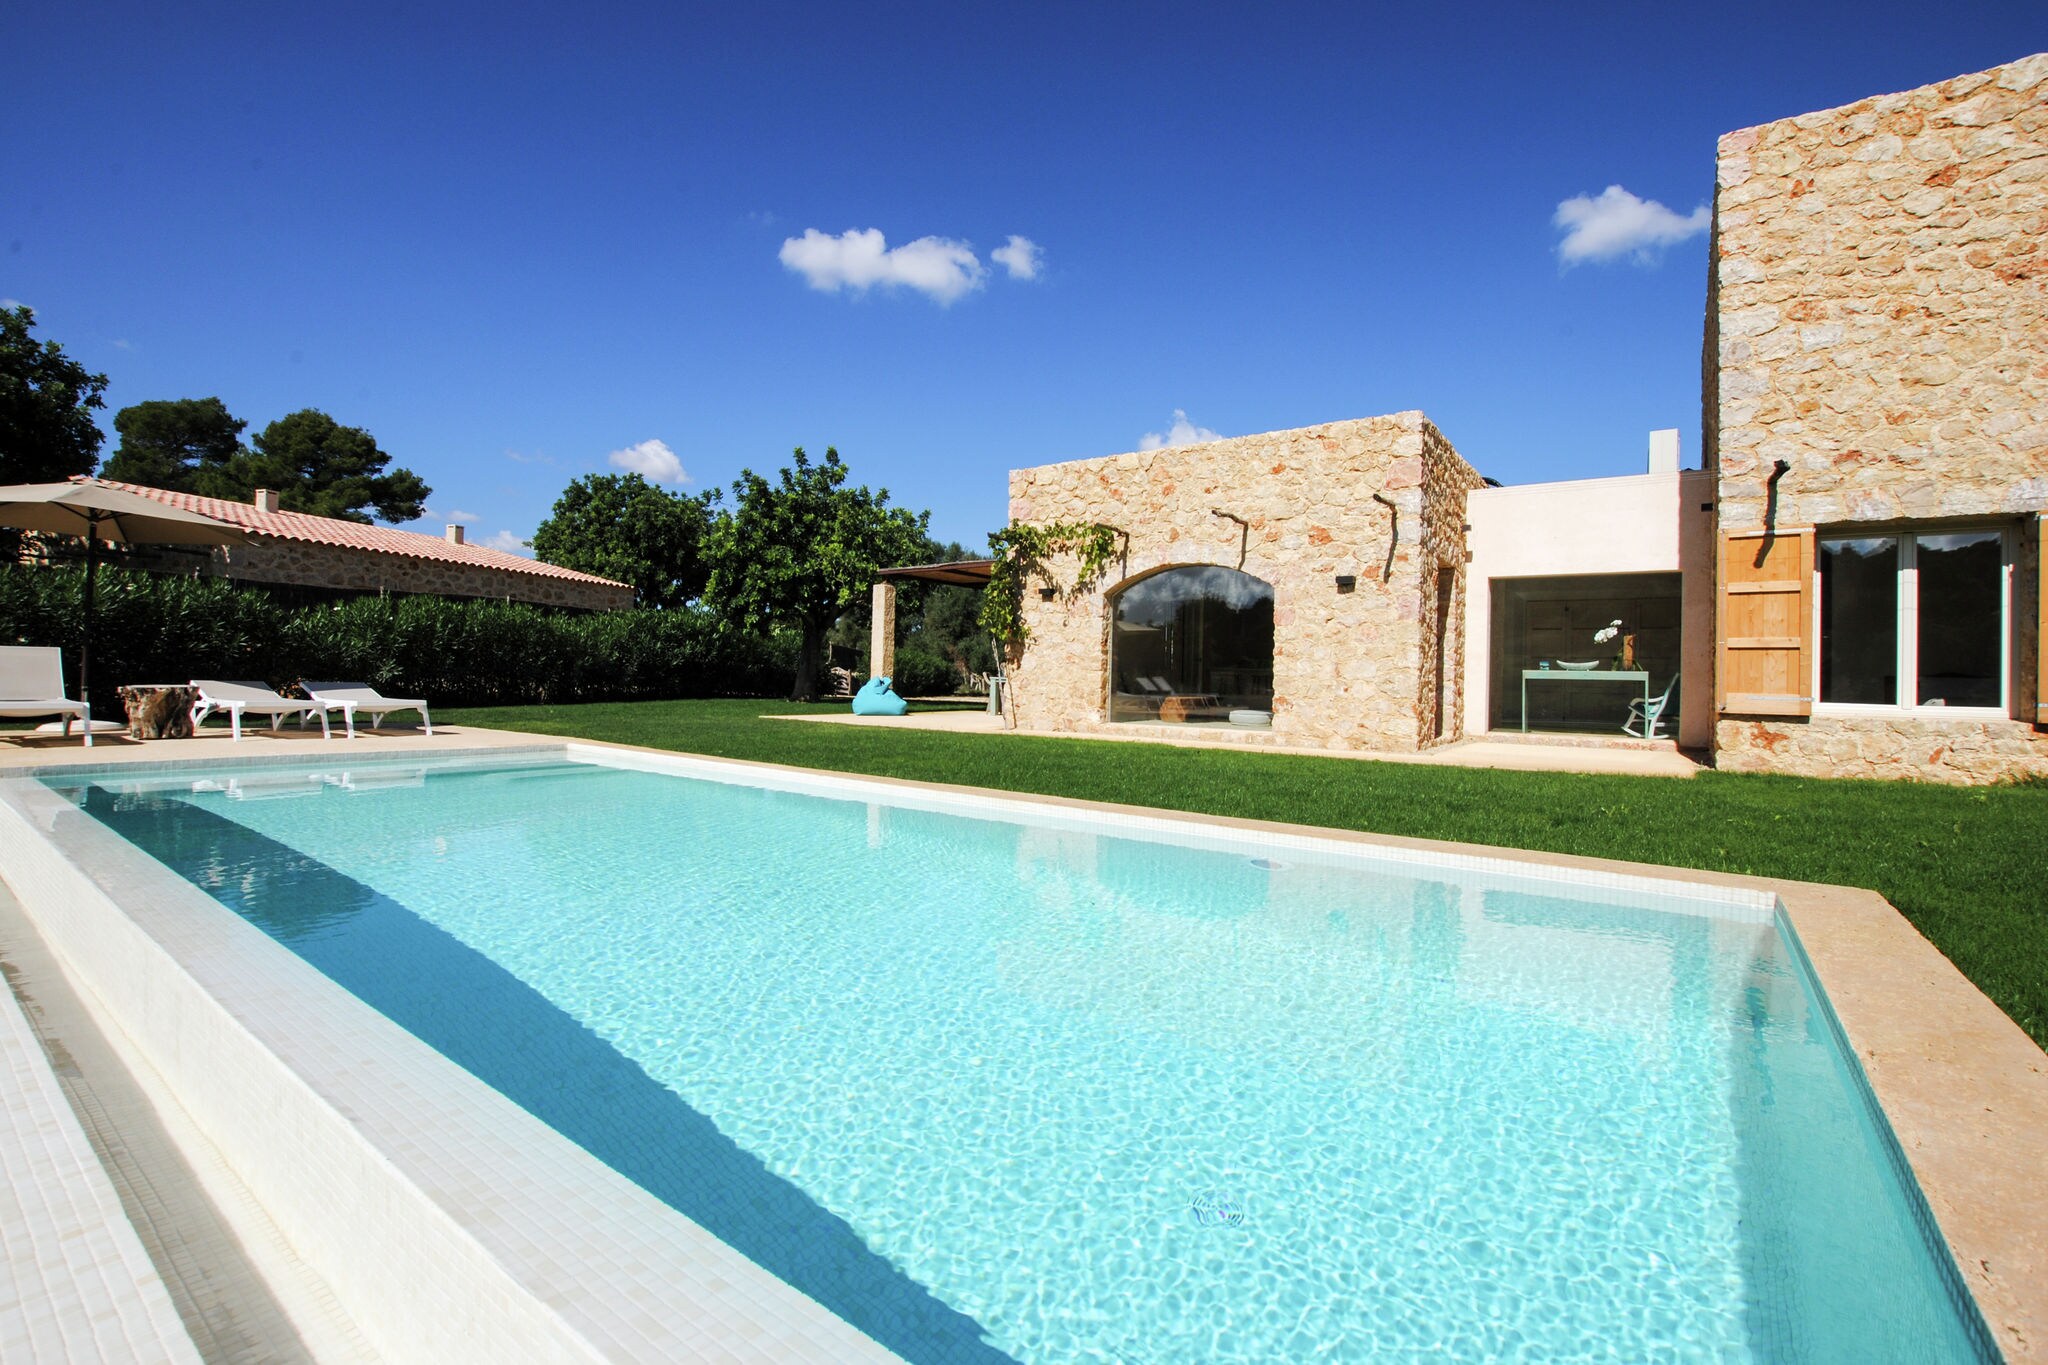 For lovers of holiday in style, with pool and near Porto Cristo